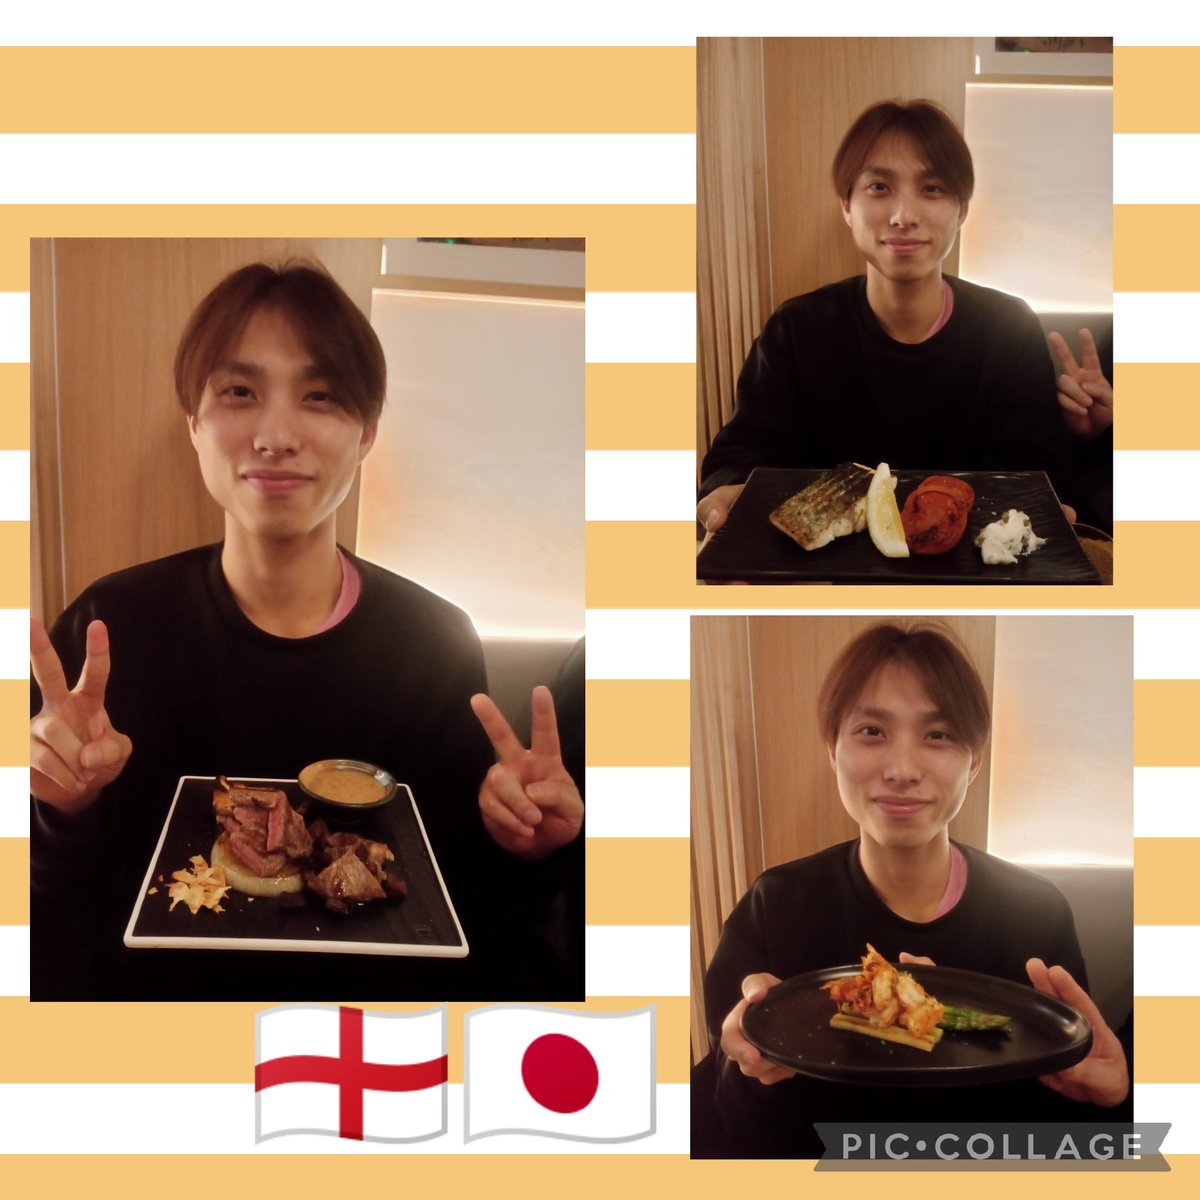 This is the last smile from Birmingham🏴󠁧󠁢󠁥󠁮󠁧󠁿
Thank you for your support😀
I will keep going to the future🏆
See you again and wish you all well🤗

#kodainaraoka 
#Japanesefood 
#TAKUMI
#restaurant 
#Birmingham